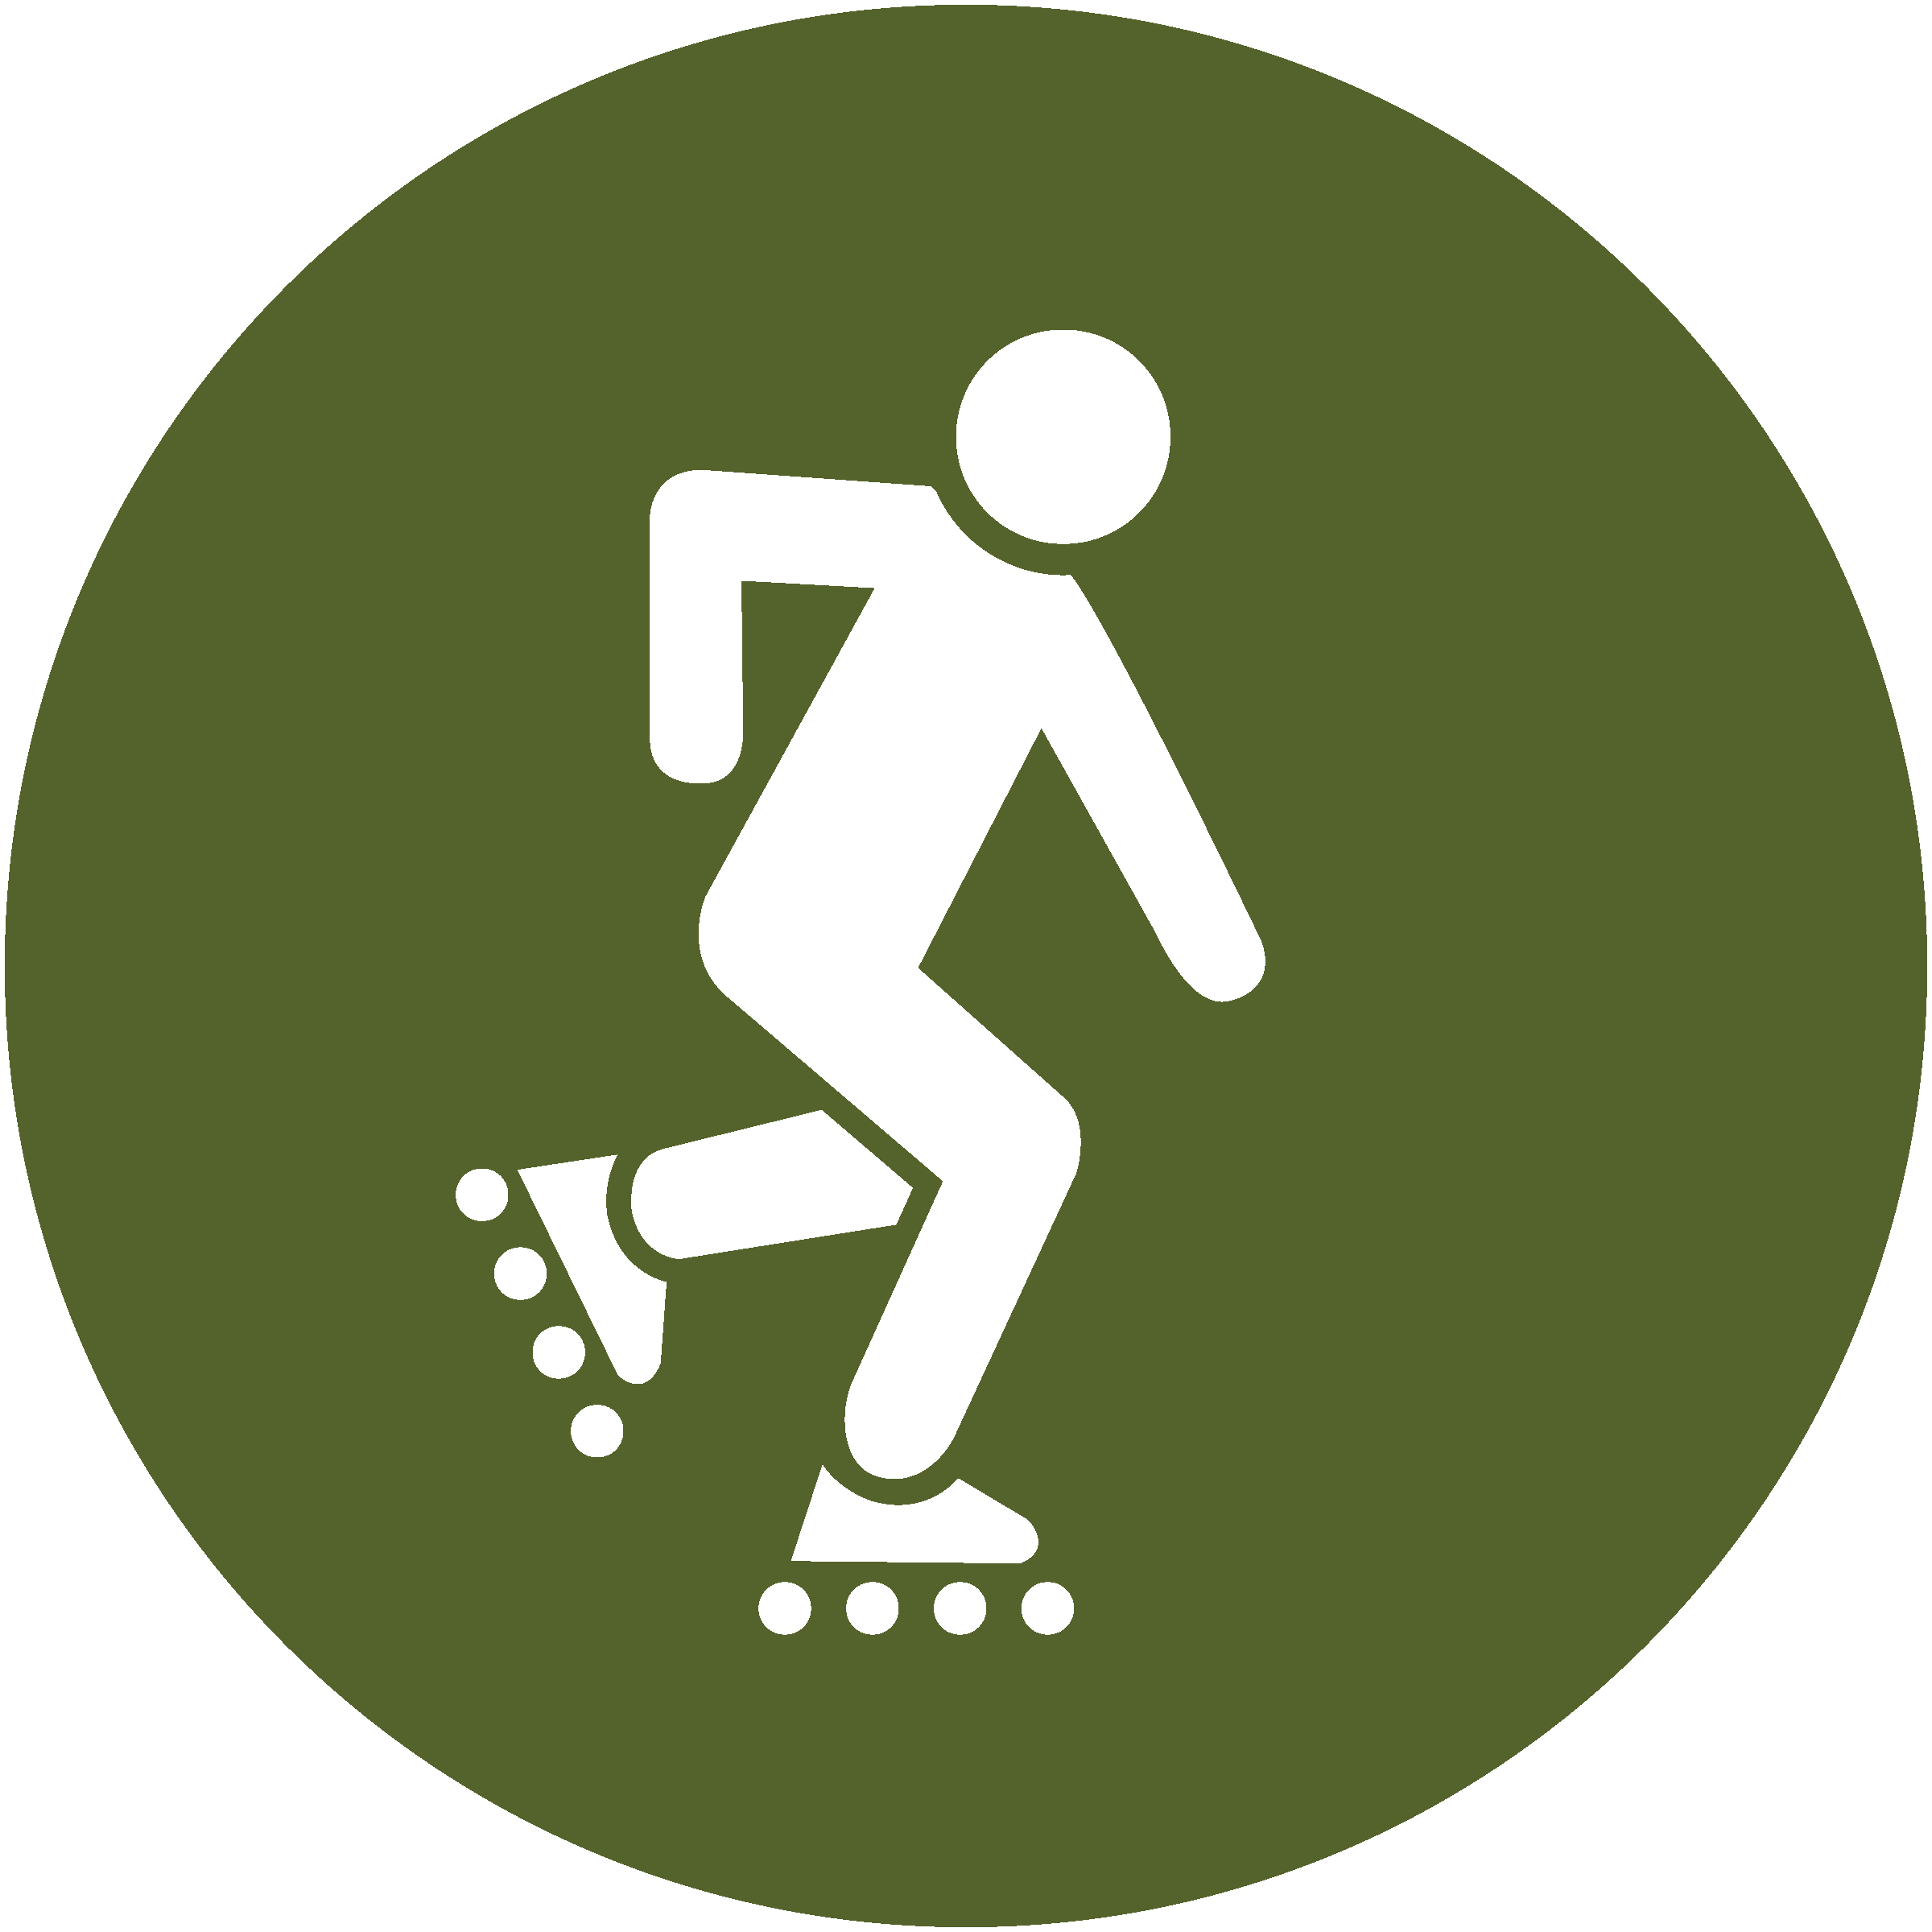 icon of person roller skating